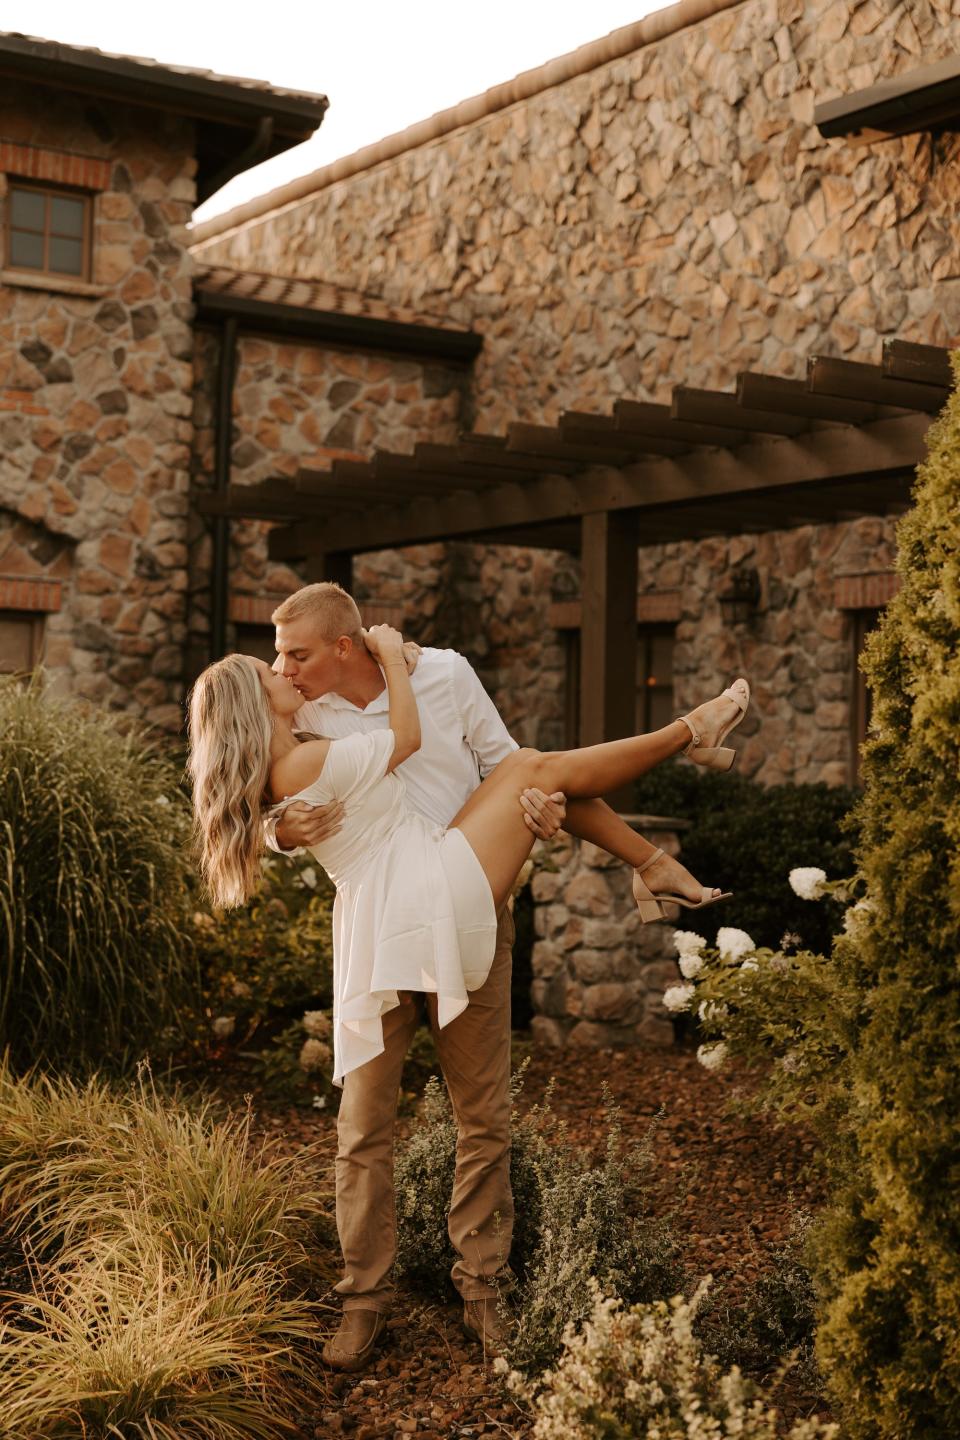 A man in a white shirt and khakis carries and hugs a woman in a white dress in front of a stone building.